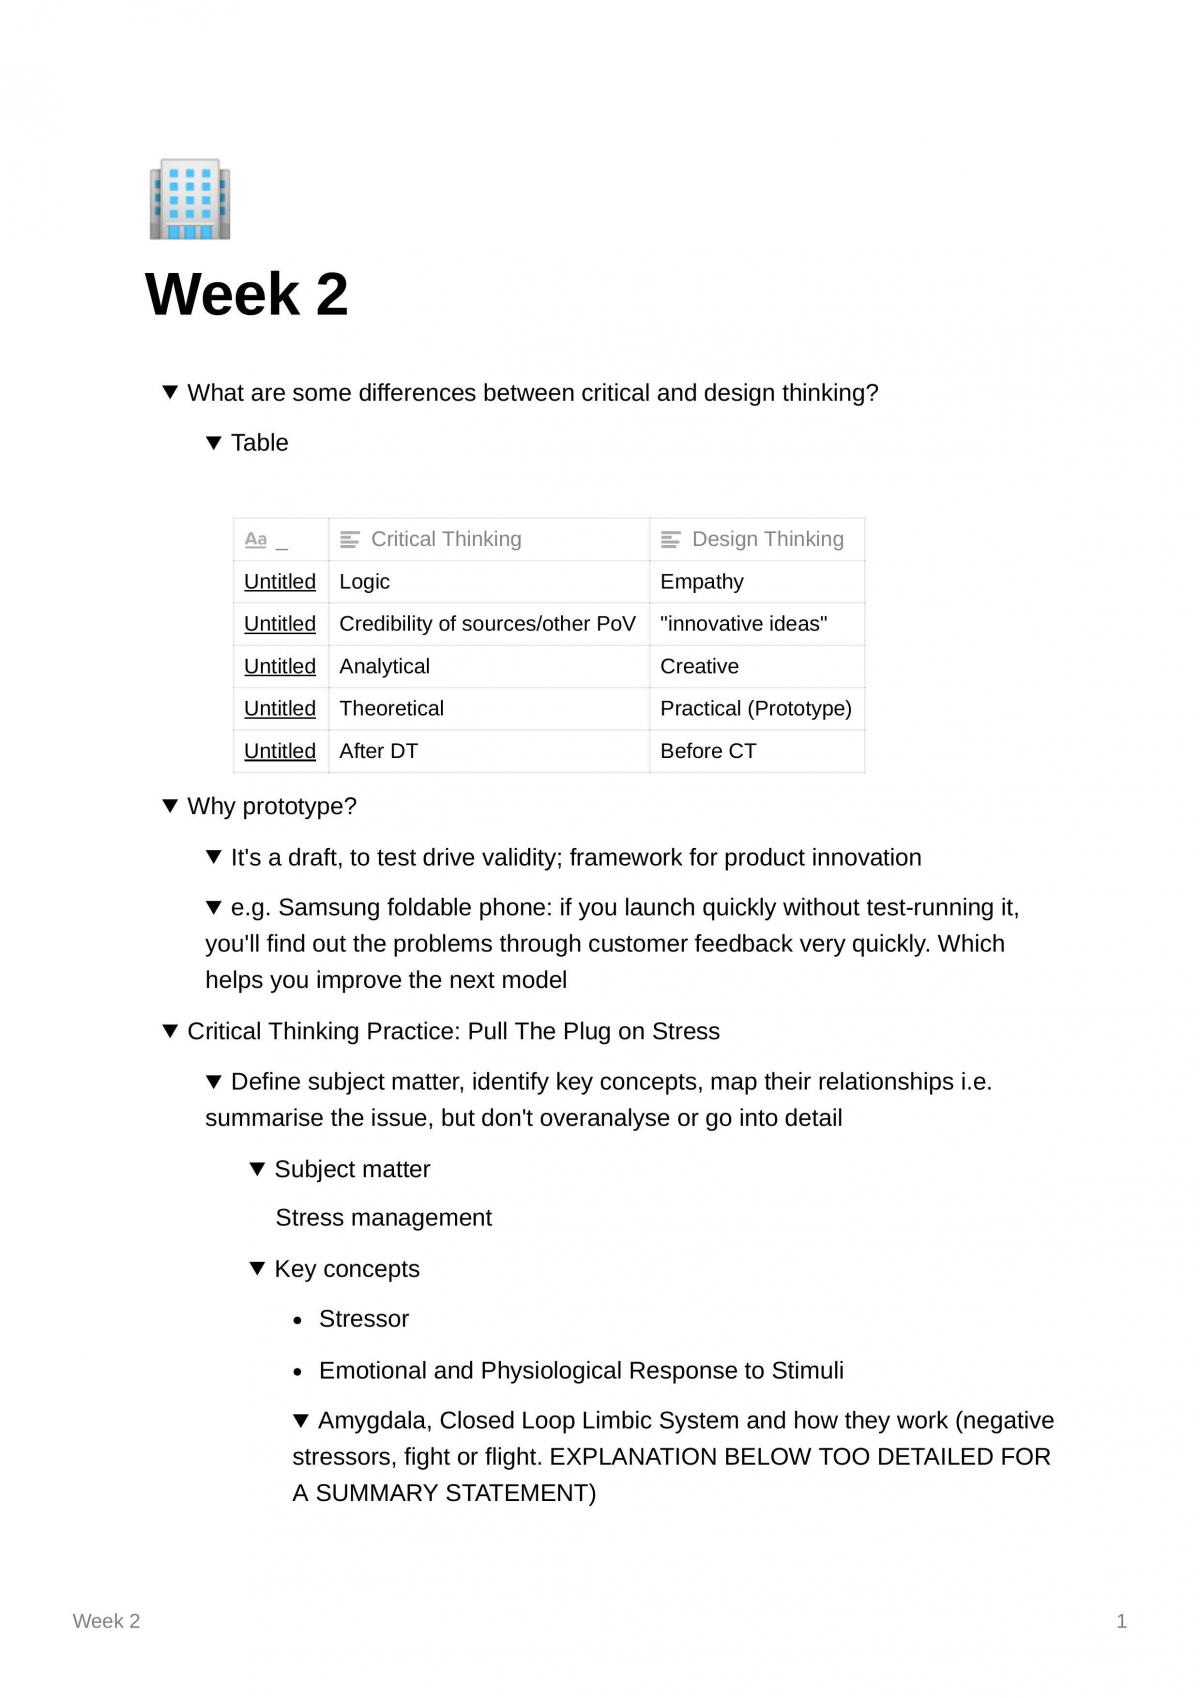 Week 2 Class Notes - Page 1